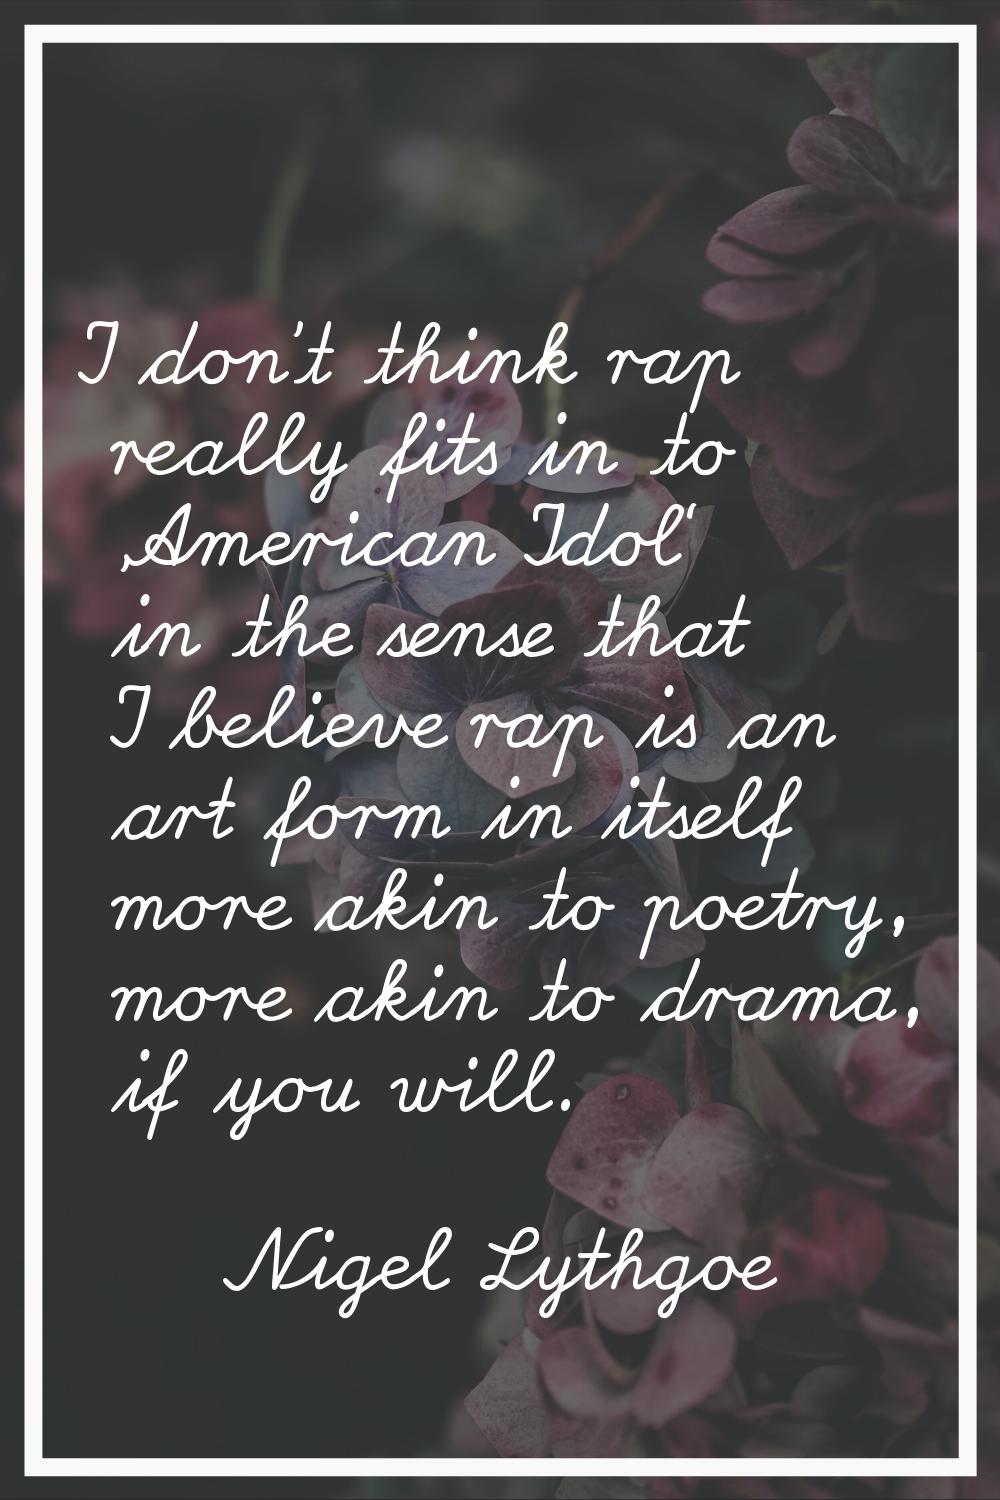 I don't think rap really fits in to 'American Idol' in the sense that I believe rap is an art form 